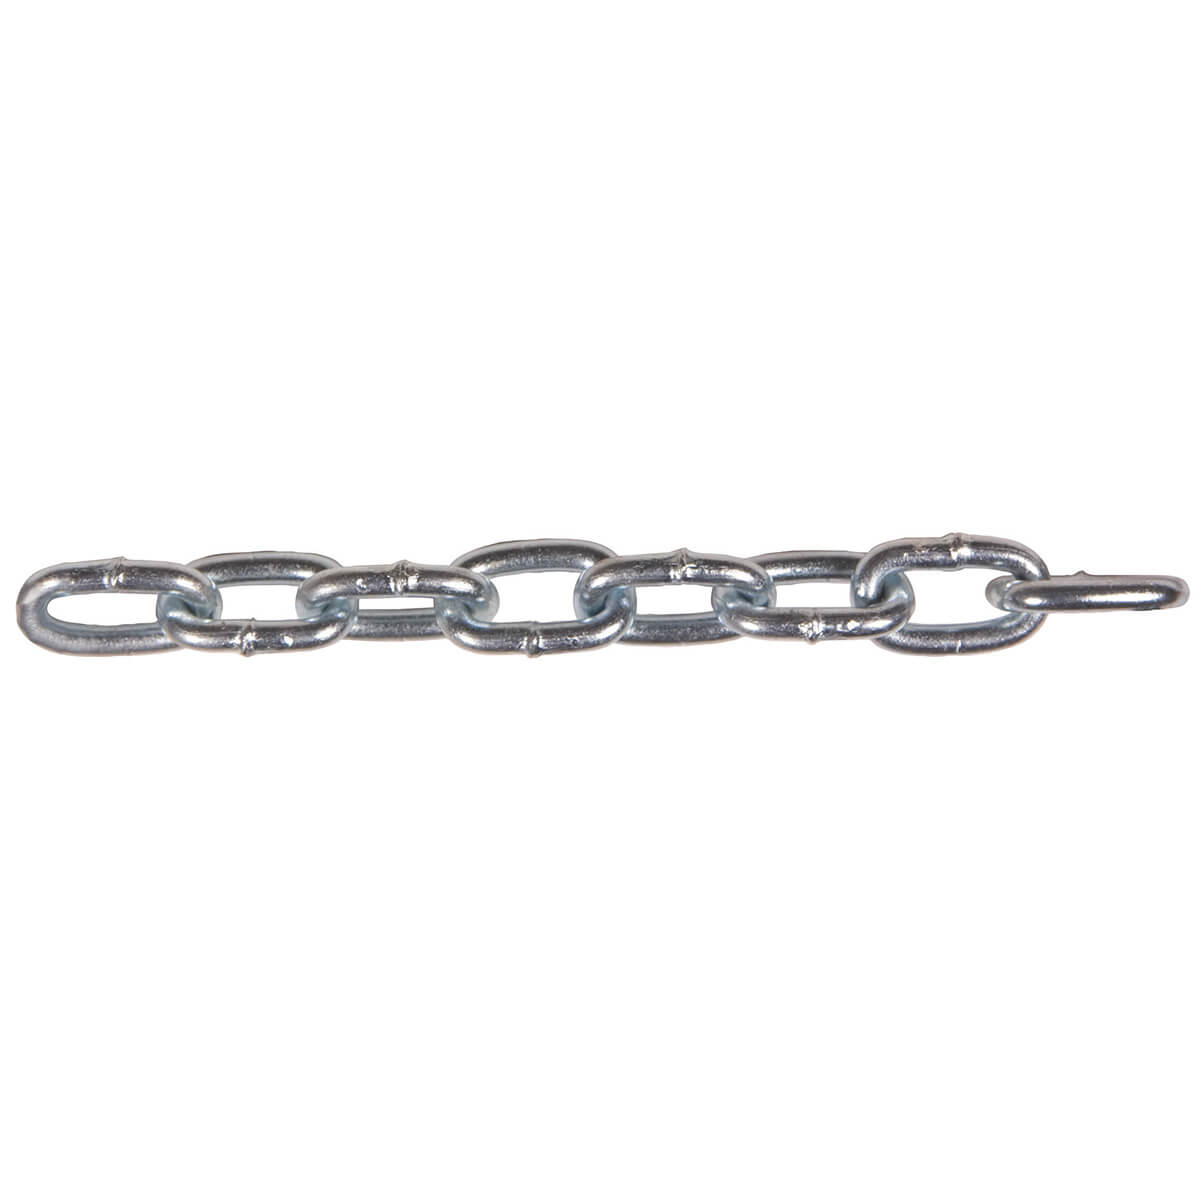 Machine Chain - Low Carbon Steel - Straight Link